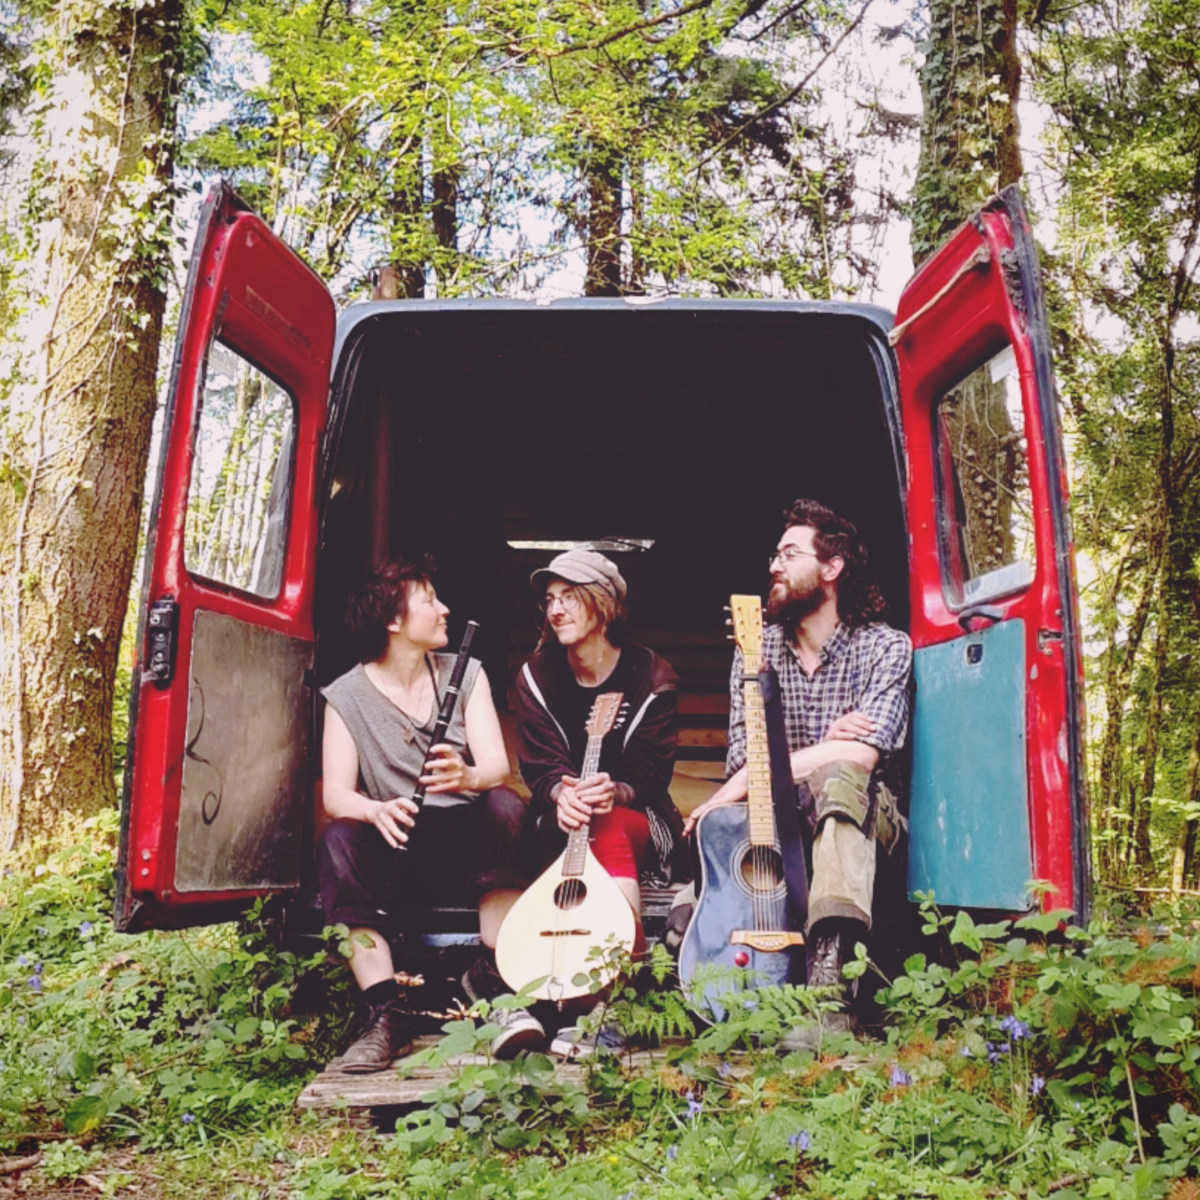 Beggar's Buttons band sitting in the open back doors of an old van.